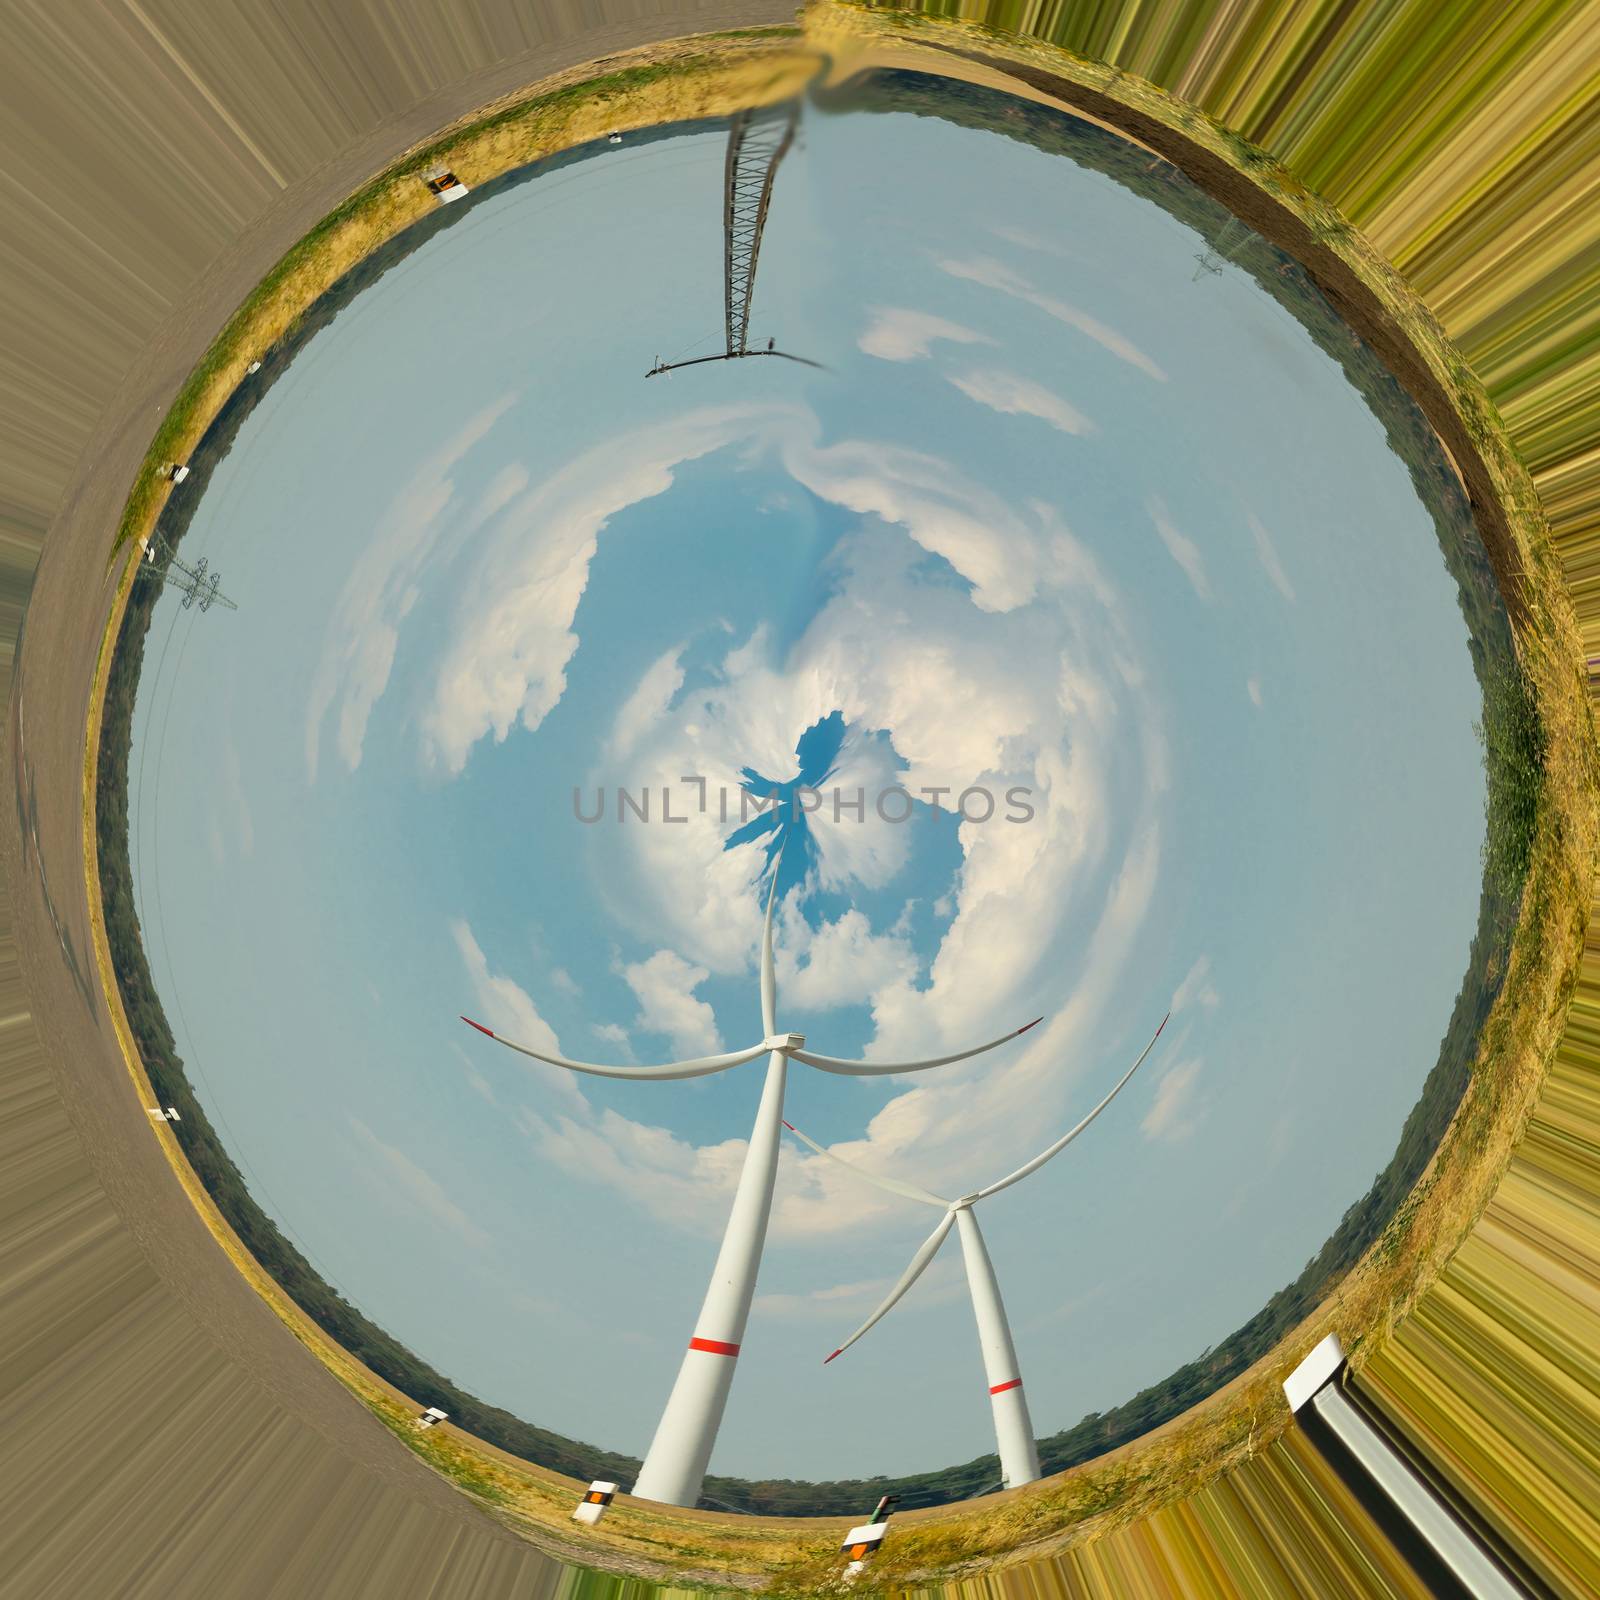 Wind turbines for renewable energies. Photo effect with distortion filter in front of blue sky